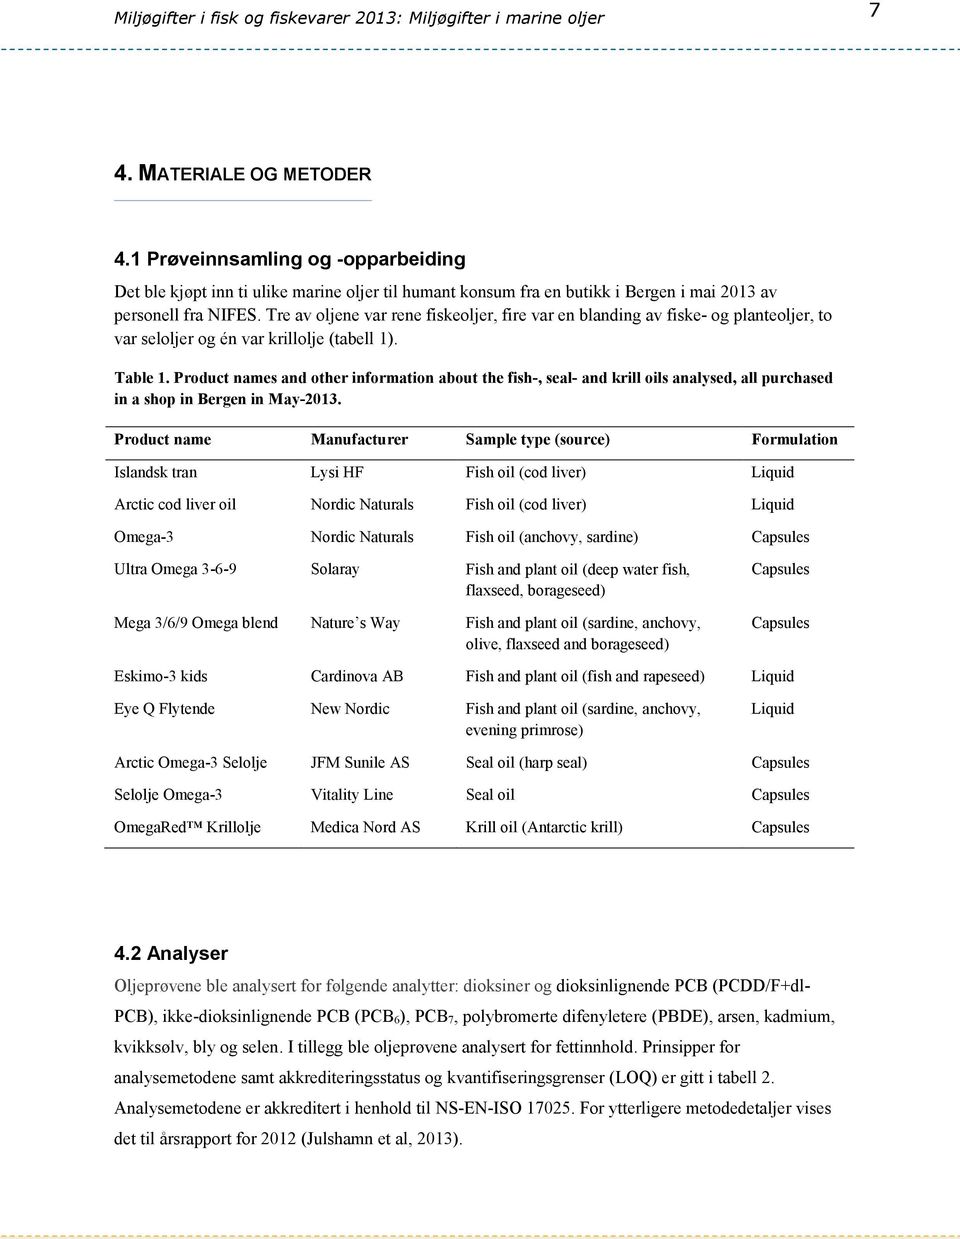 Product names and other information about the fish-, seal- and krill oils analysed, all purchased in a shop in Bergen in May-2013.